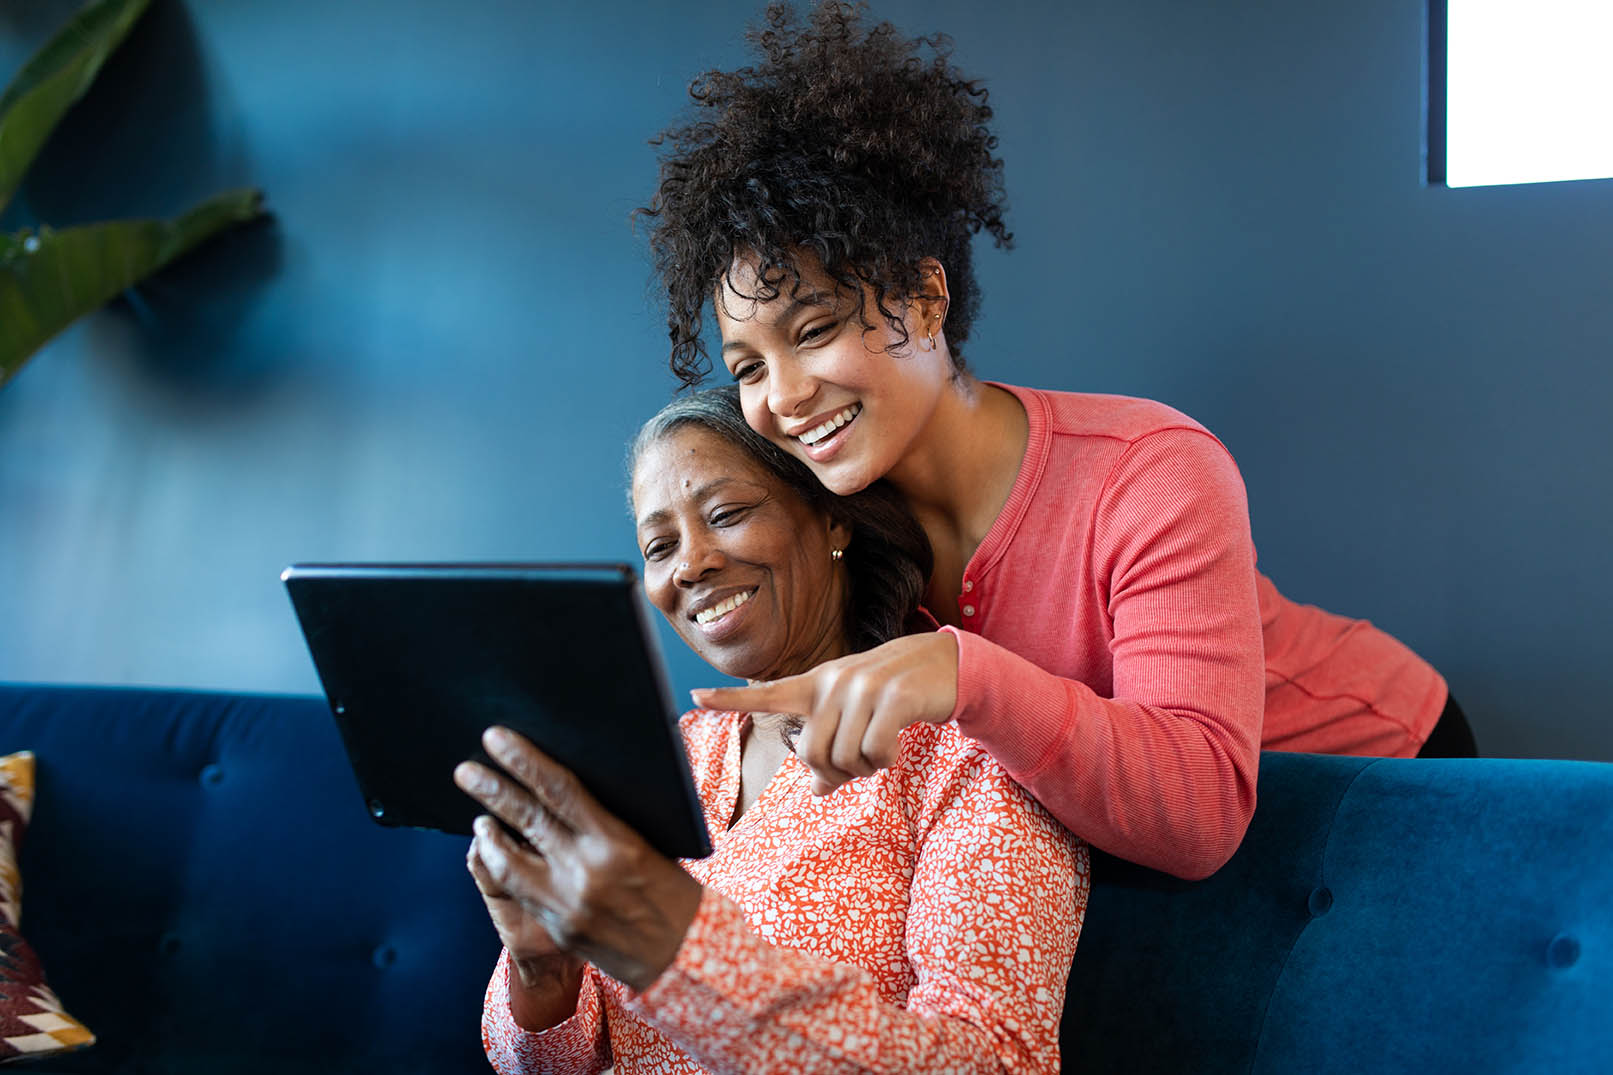 Mature black woman looking at a digital tablet together with her granddaughter